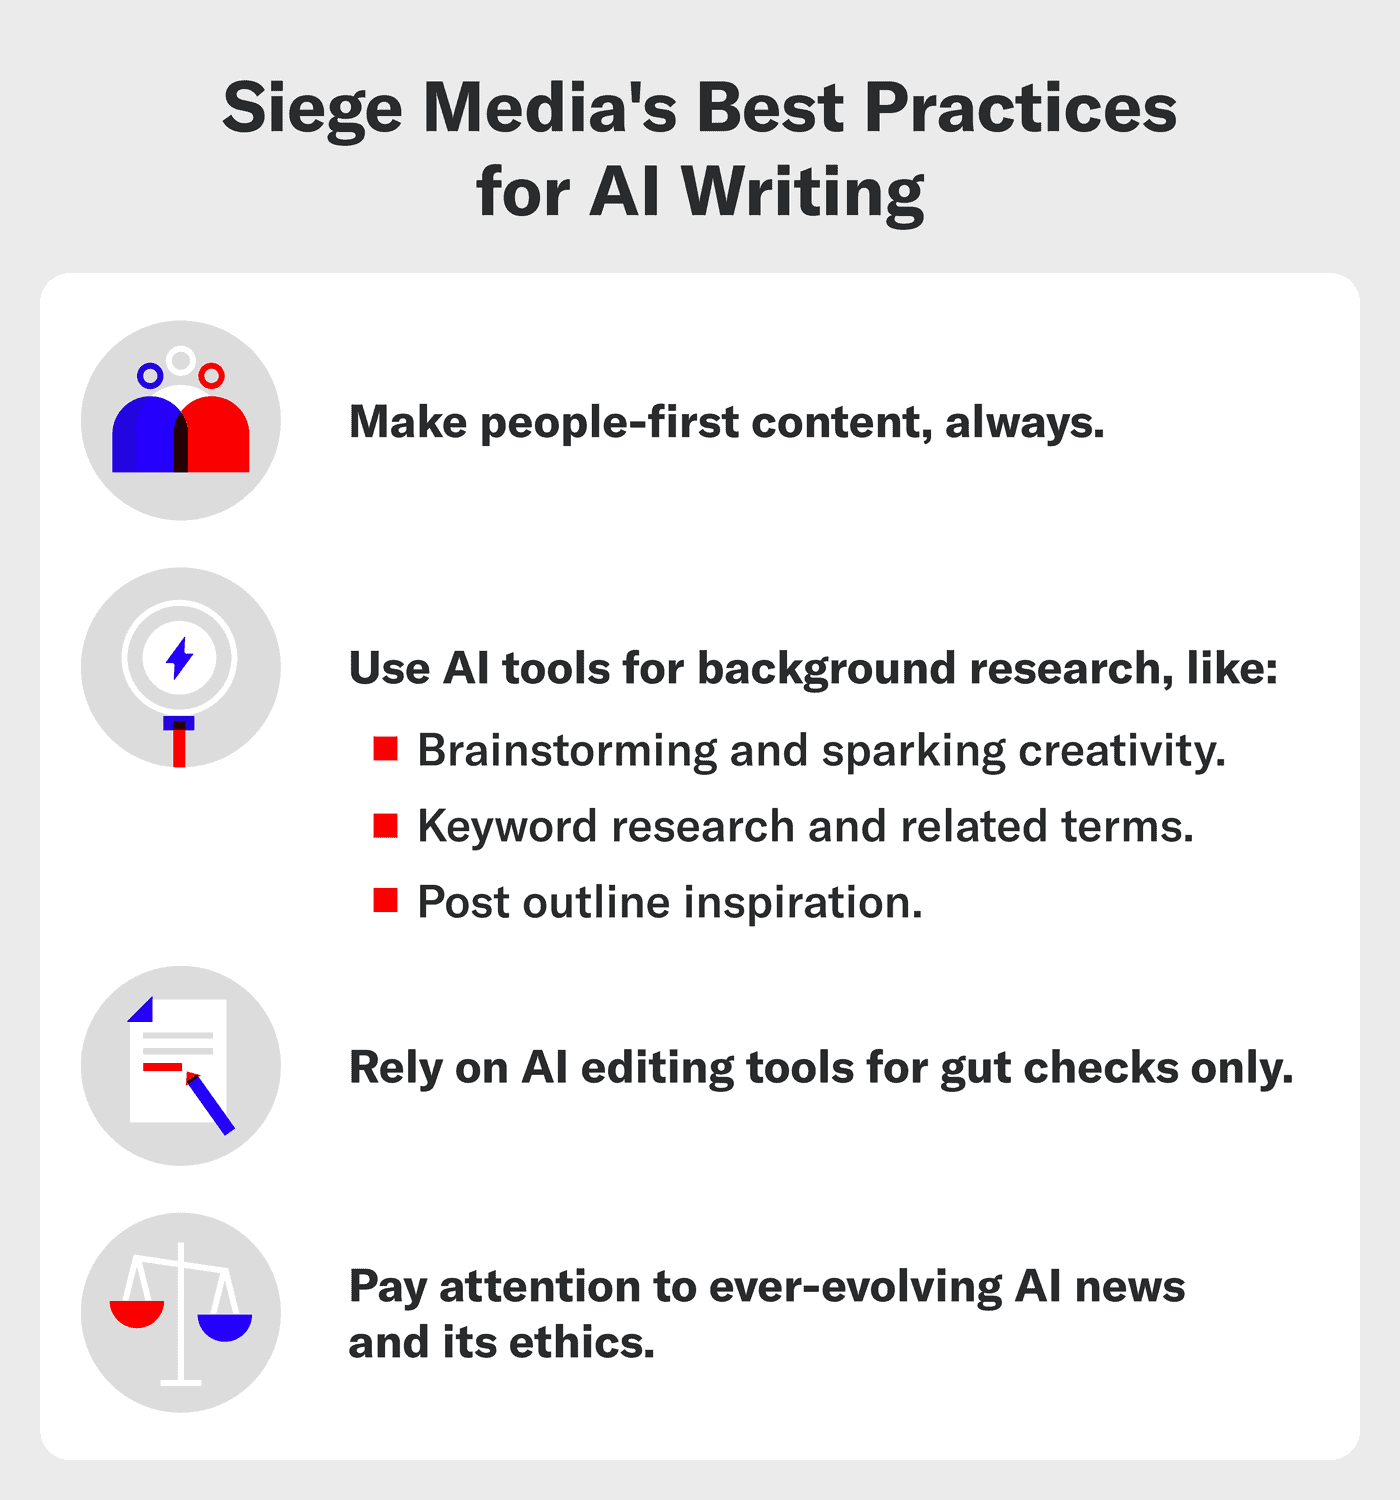 An image that shows AI writing best practices by Siege Media